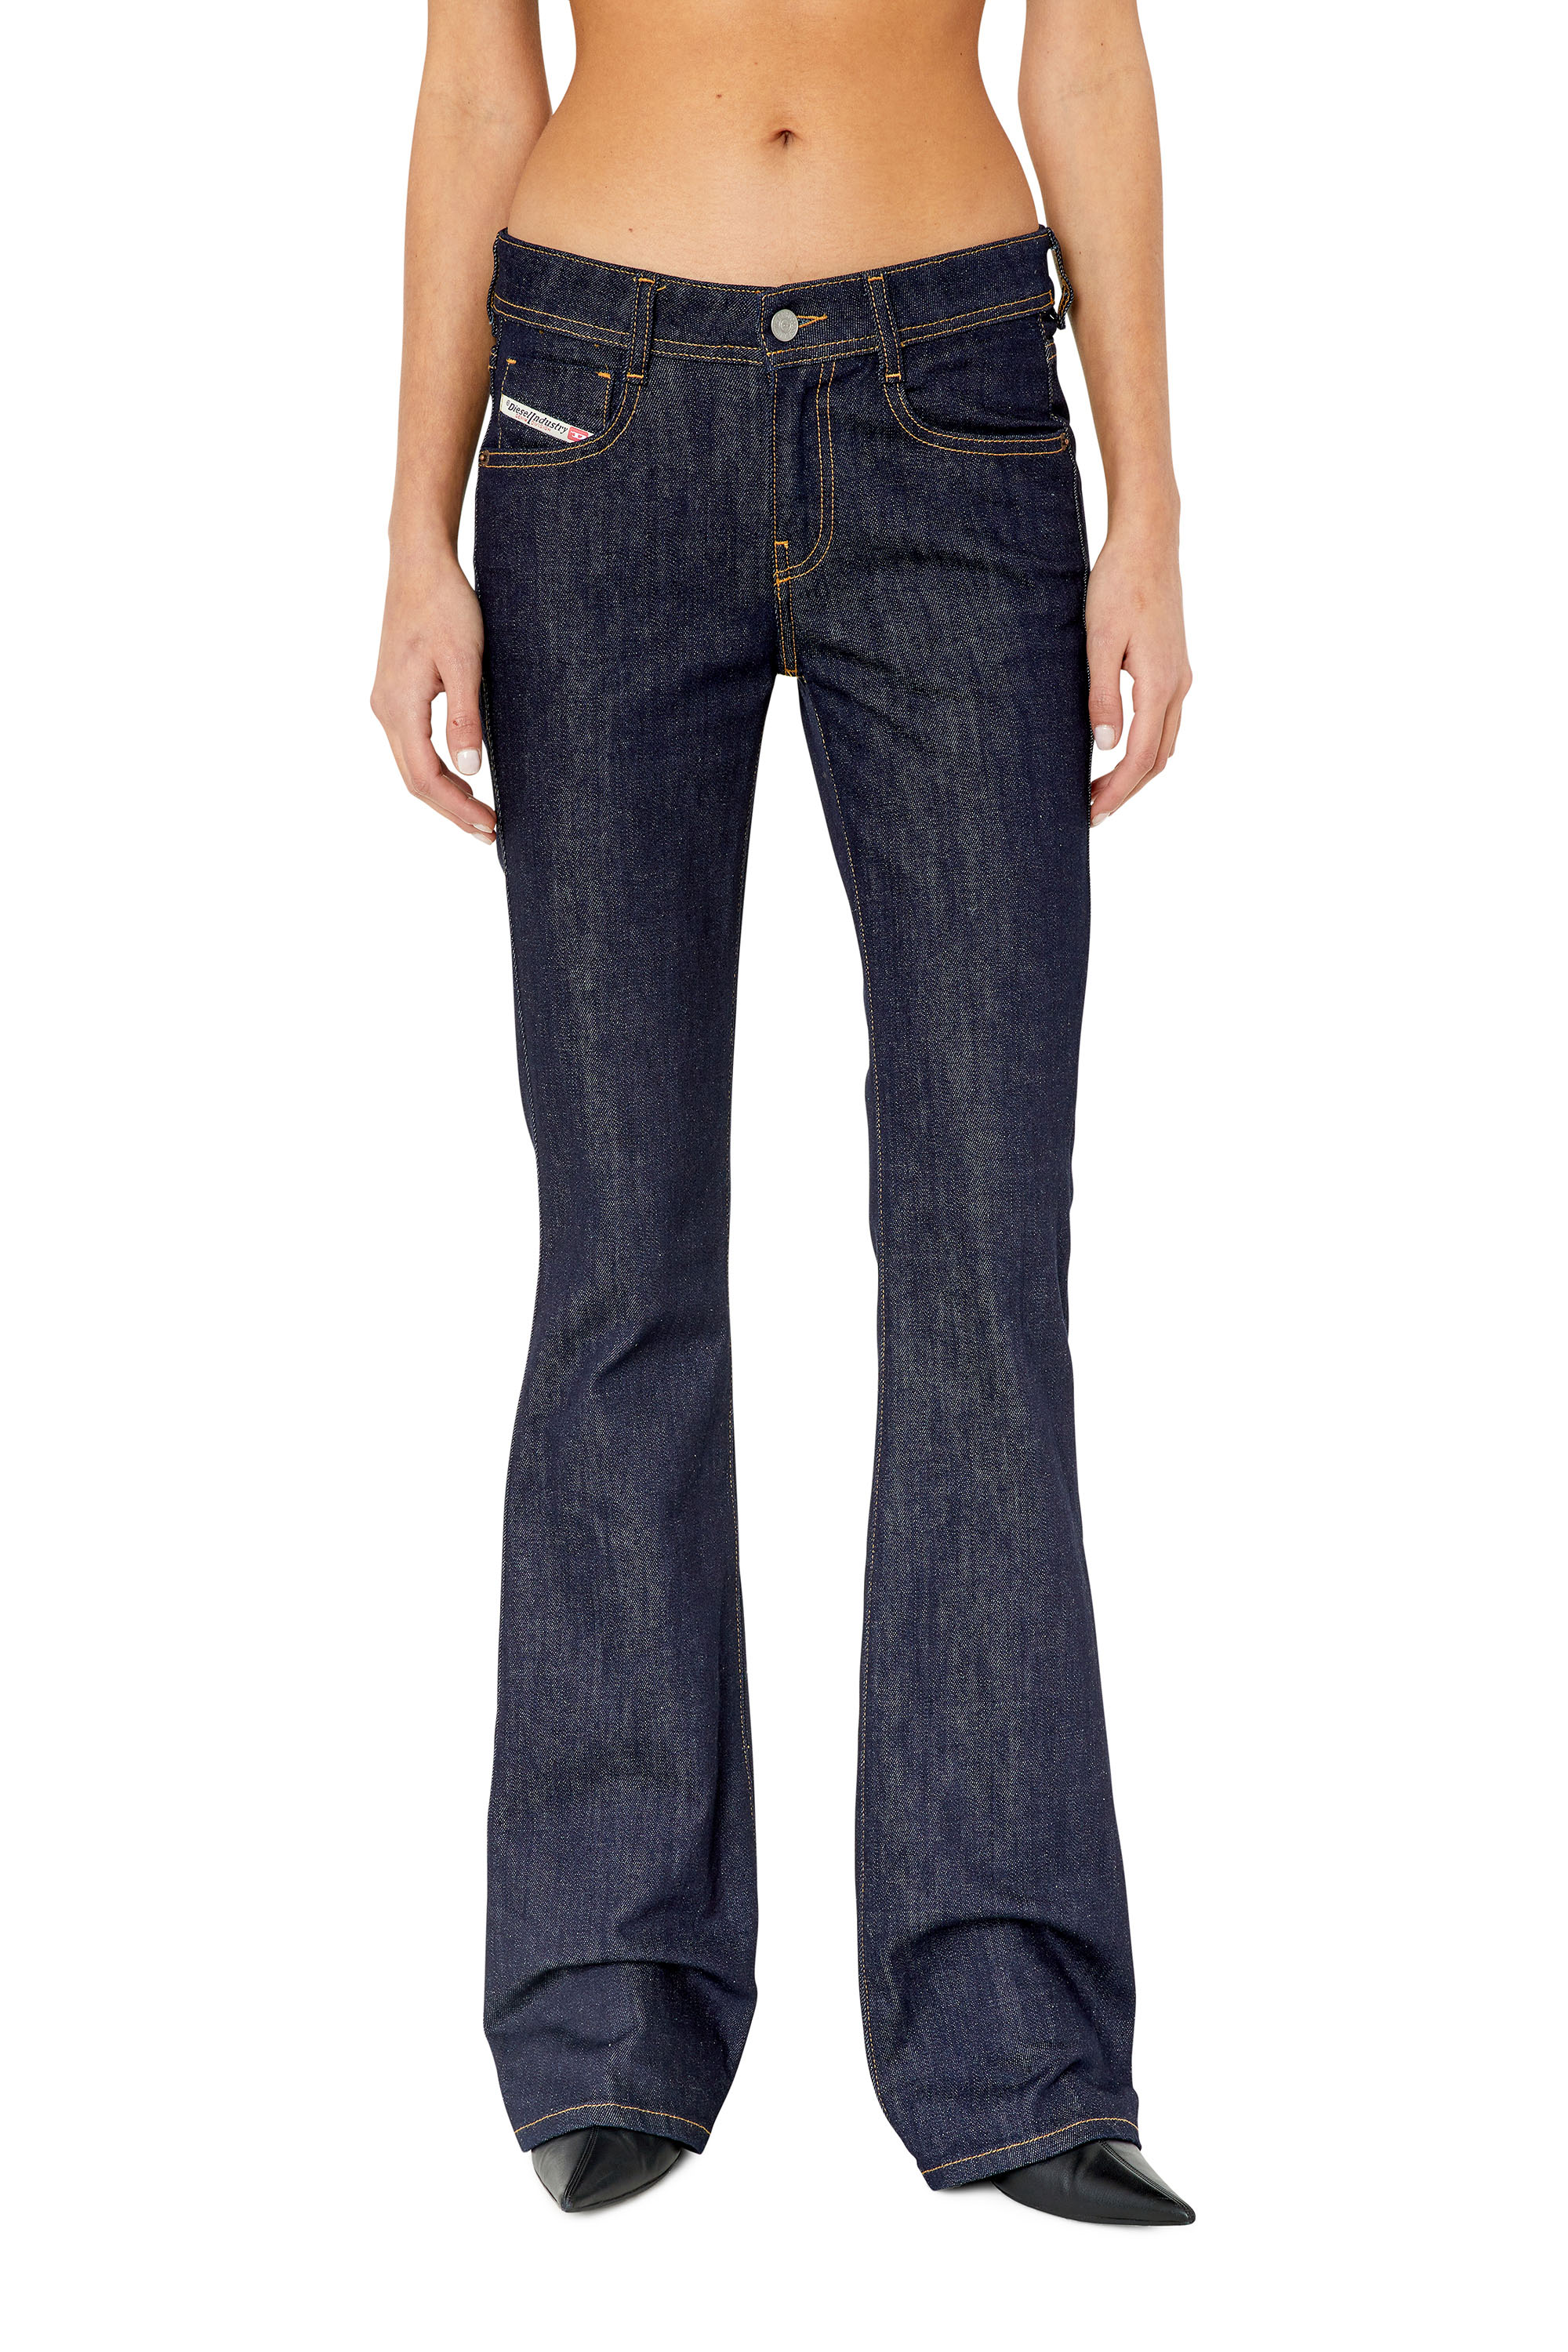 Diesel - Bootcut and Flare Jeans 1969 D-Ebbey Z9B89, Mujer Bootcut y Flare Jeans - 1969 D-Ebbey in Azul marino - Image 2